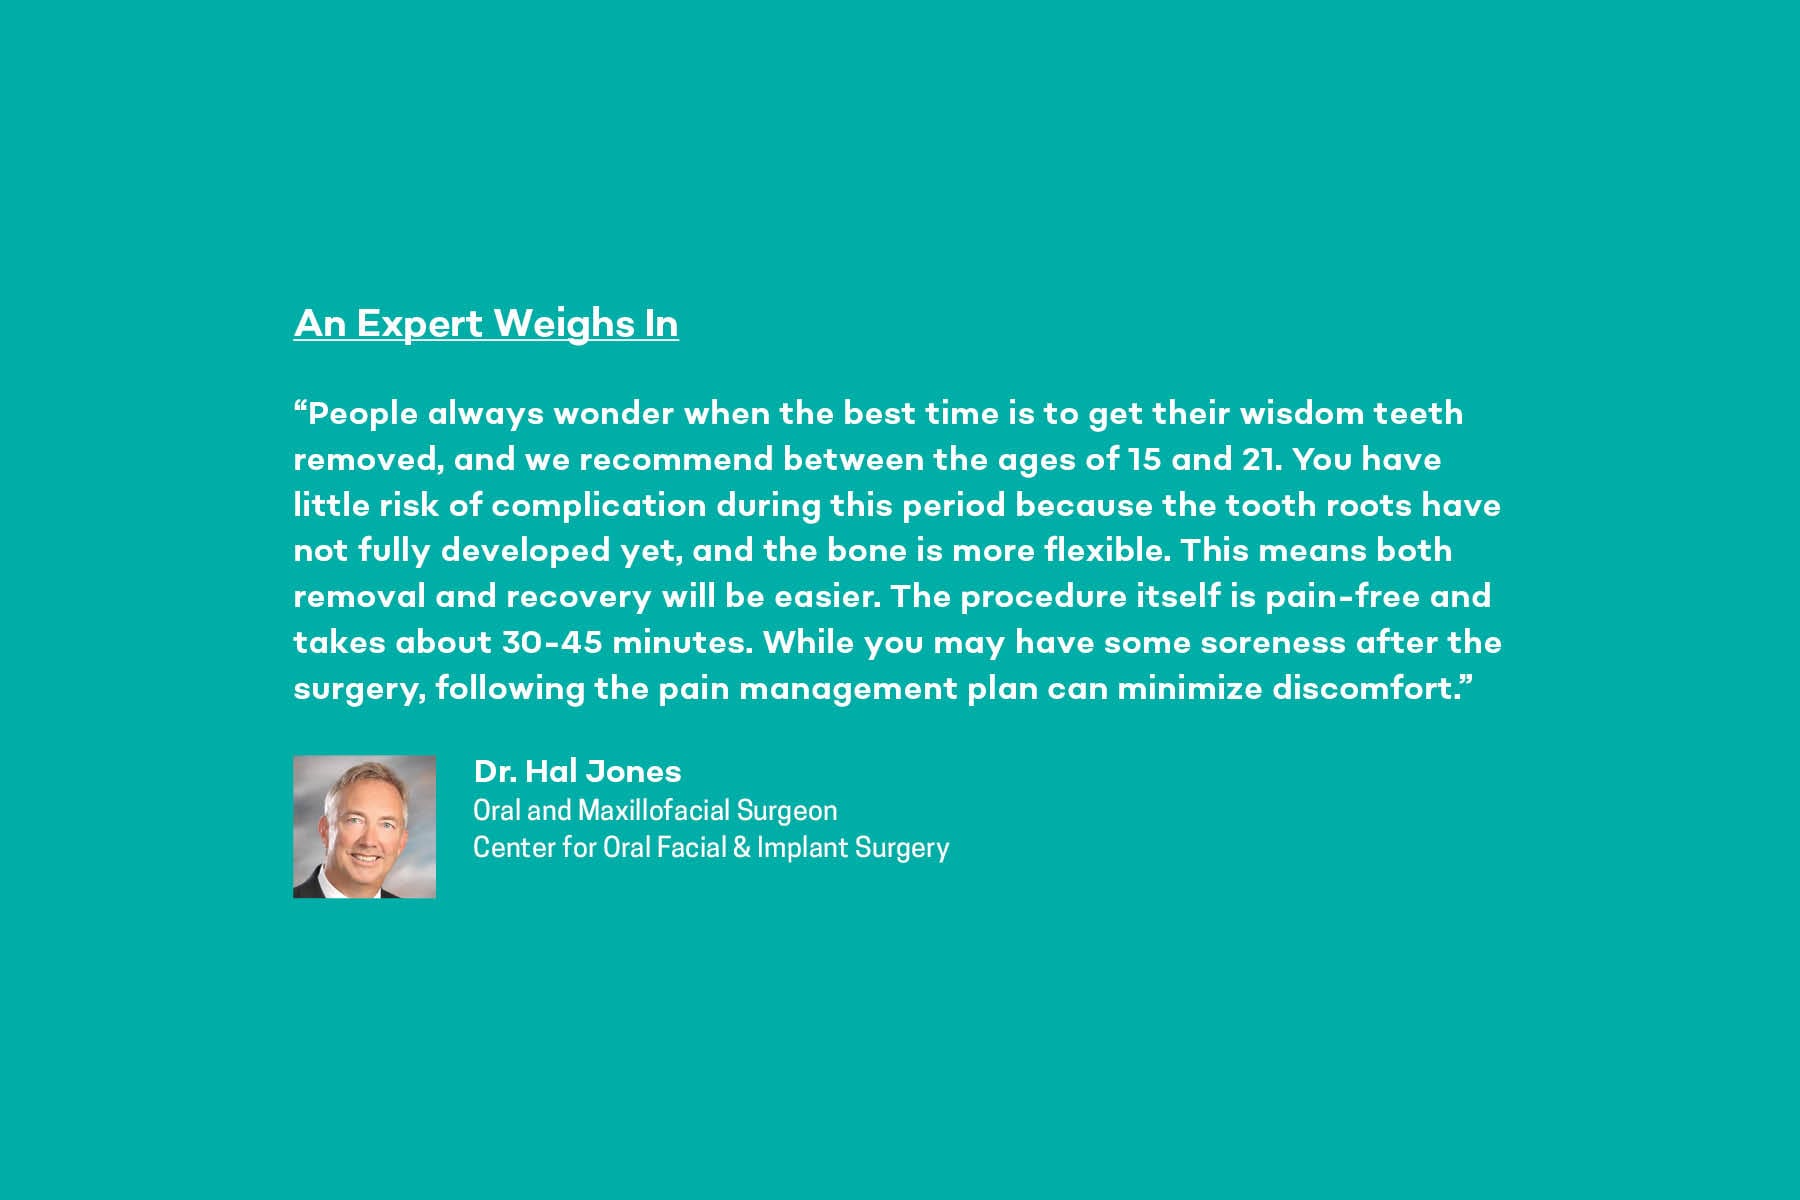 Dr. Hal Jones at Center for Oral Facial & Implant Surgery shares his expert opinion on wisdom teeth and when to get them removed